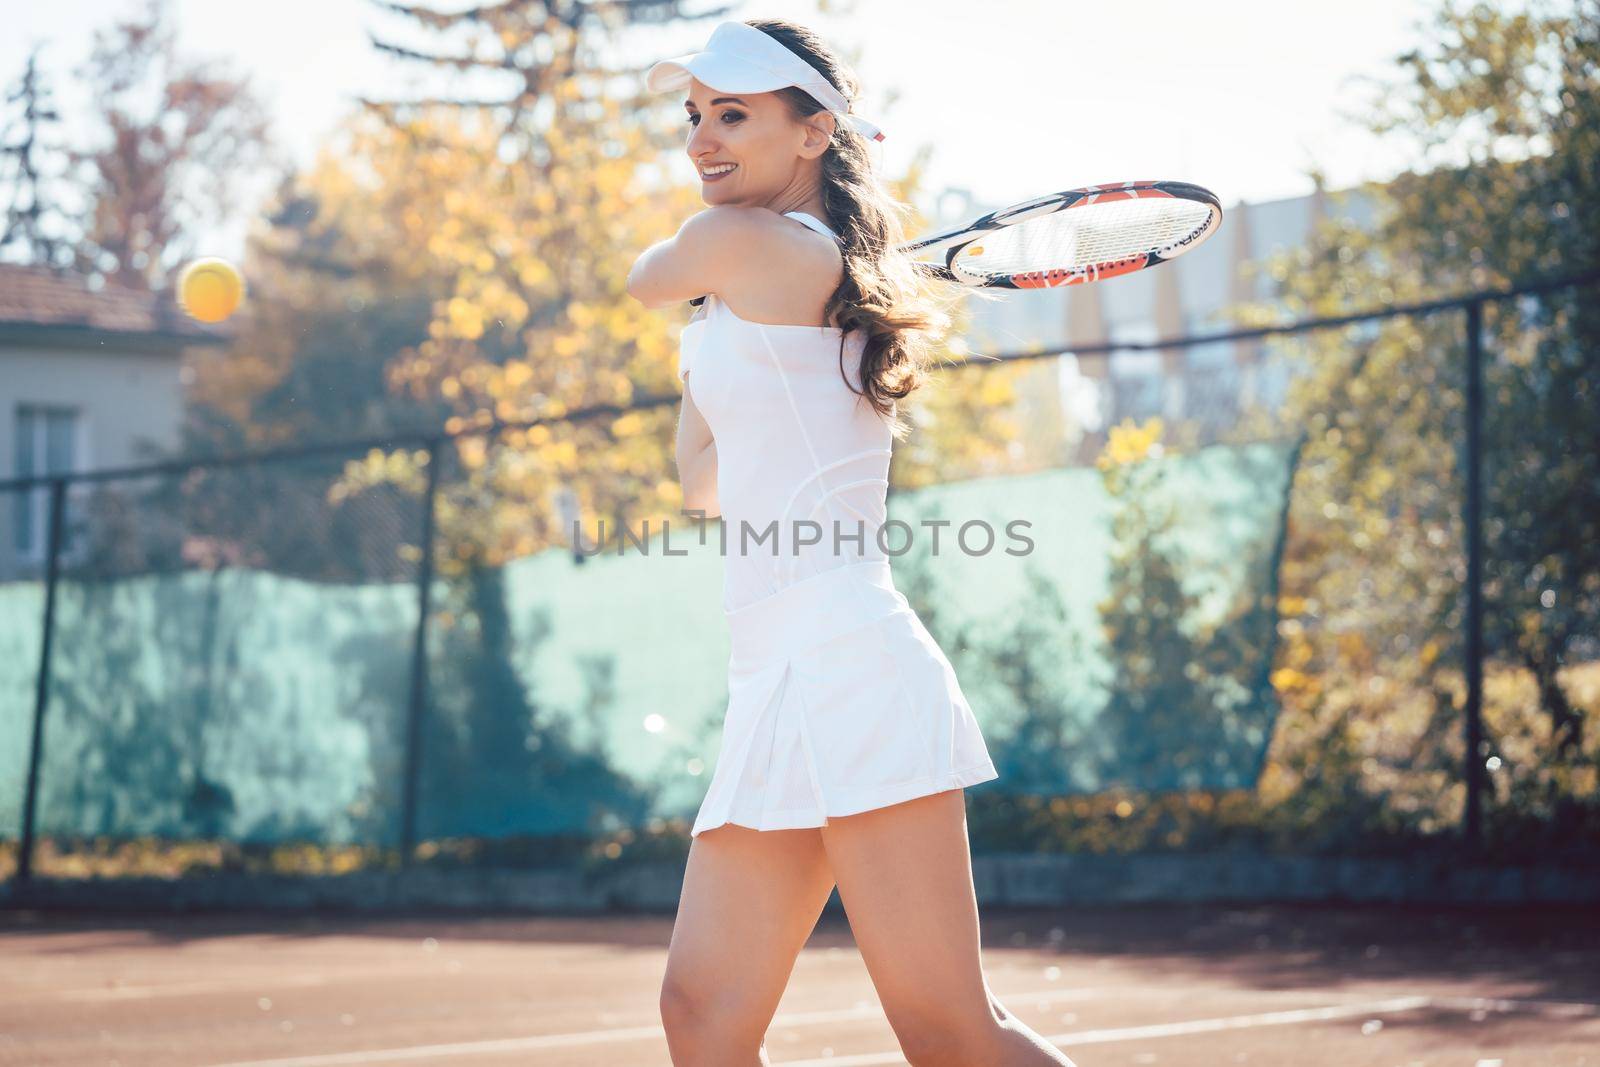 Woman playing tennis on court by Kzenon